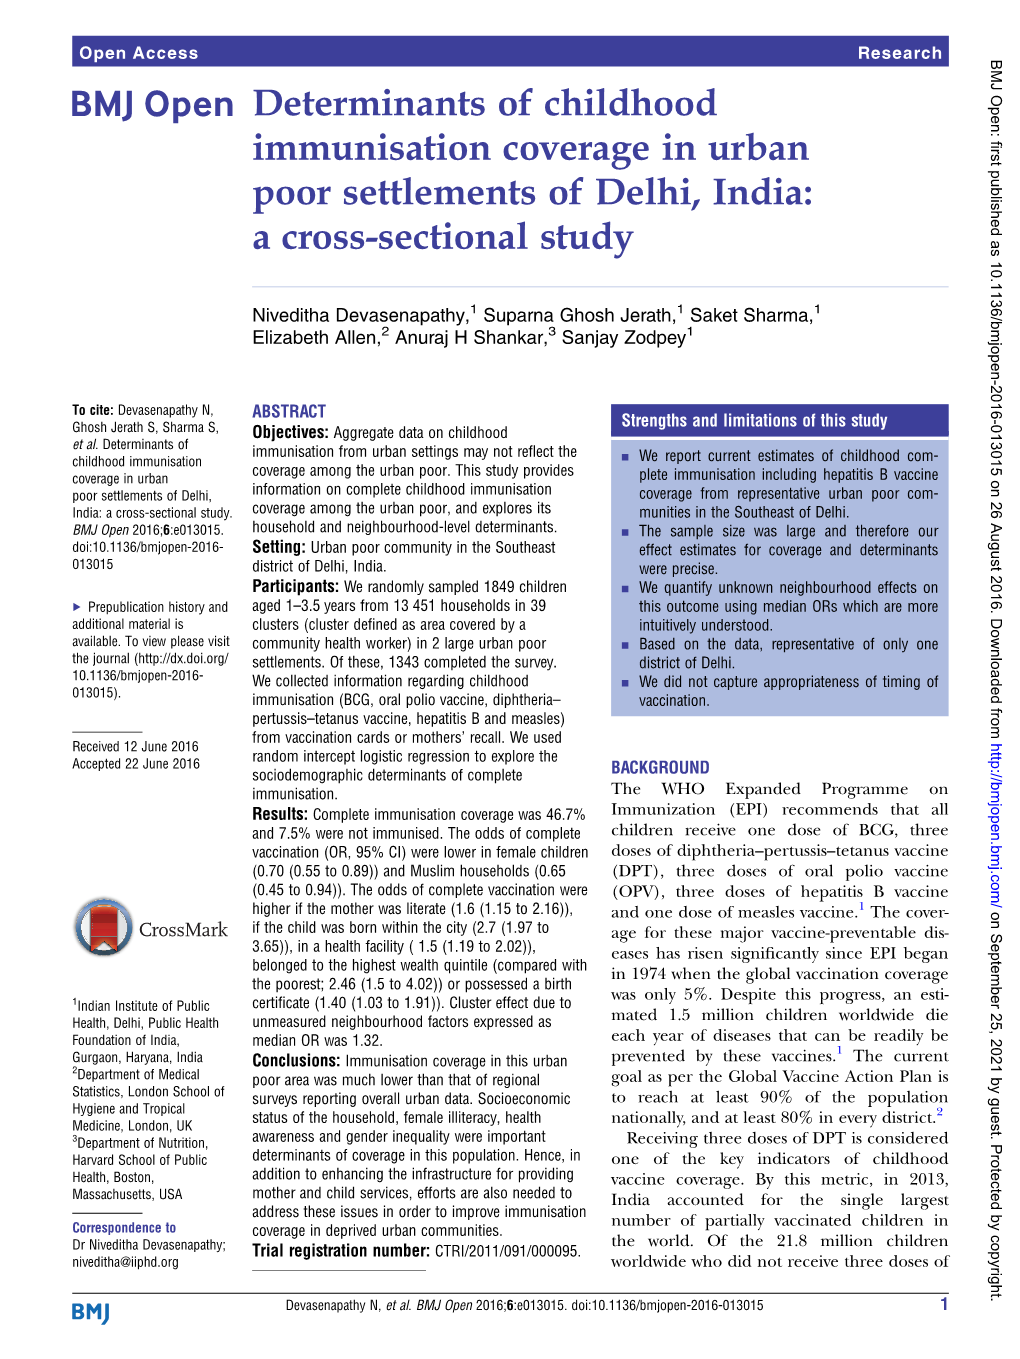 Determinants of Childhood Immunisation Coverage in Urban Poor Settlements of Delhi, India: a Cross-Sectional Study